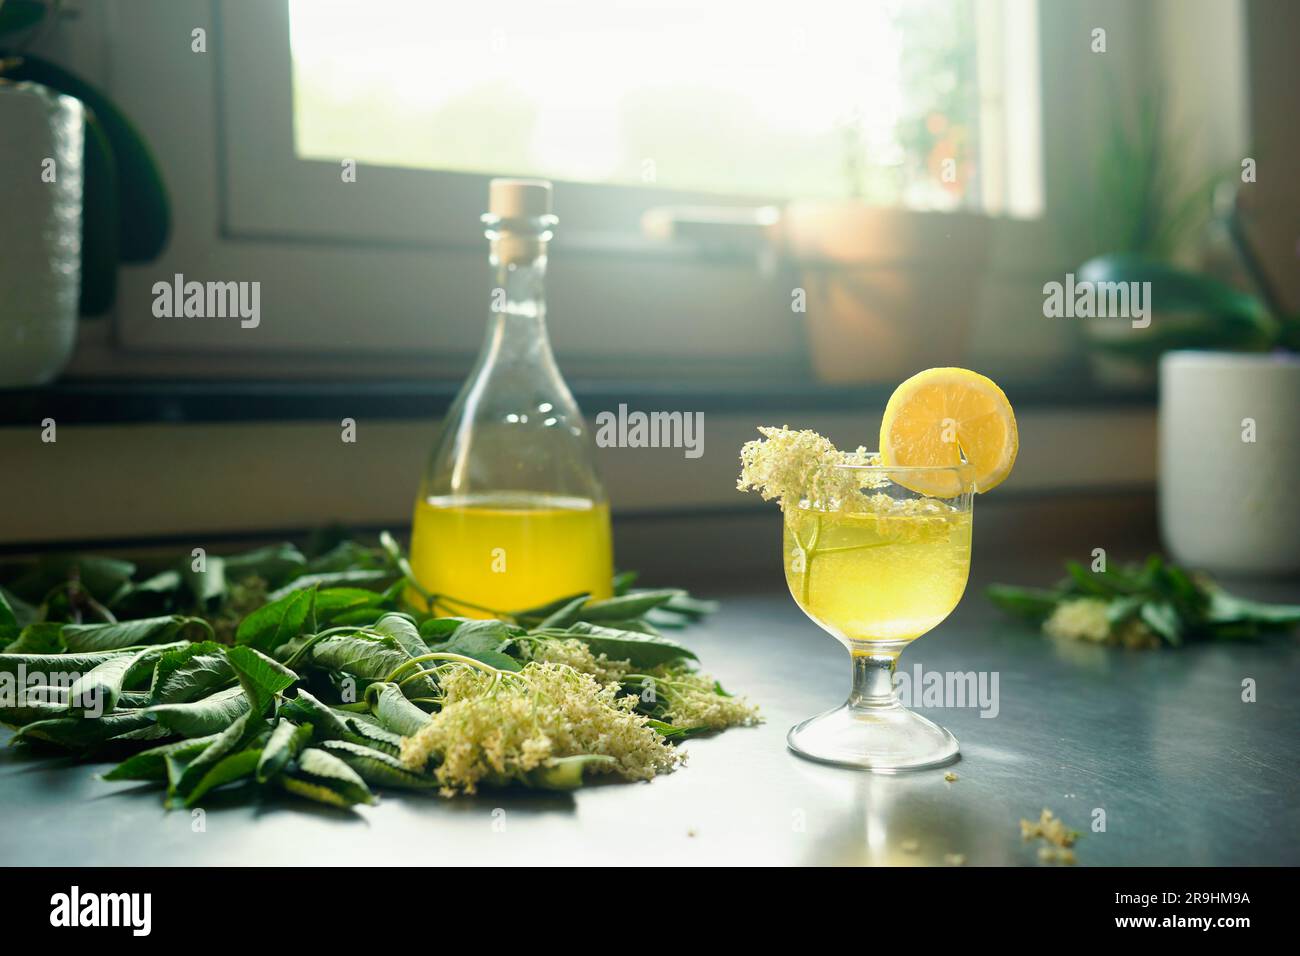 Elderflower Cordial in glass and bottle on table with ingredients. Lemony floral refreshing drink. Front view Stock Photo